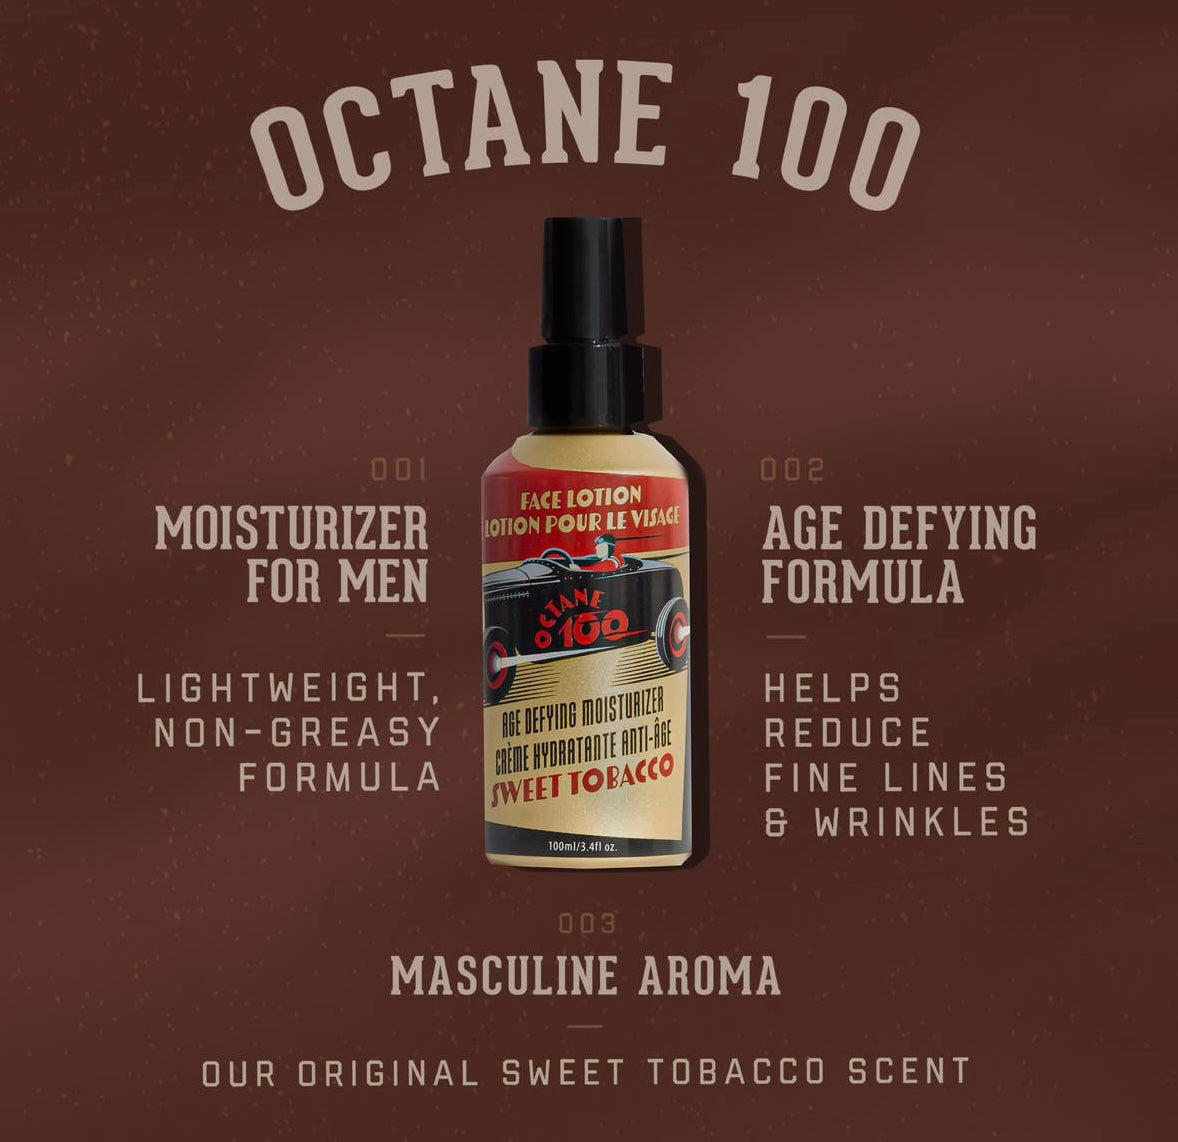 18.21 Octane 100 Face Lotion